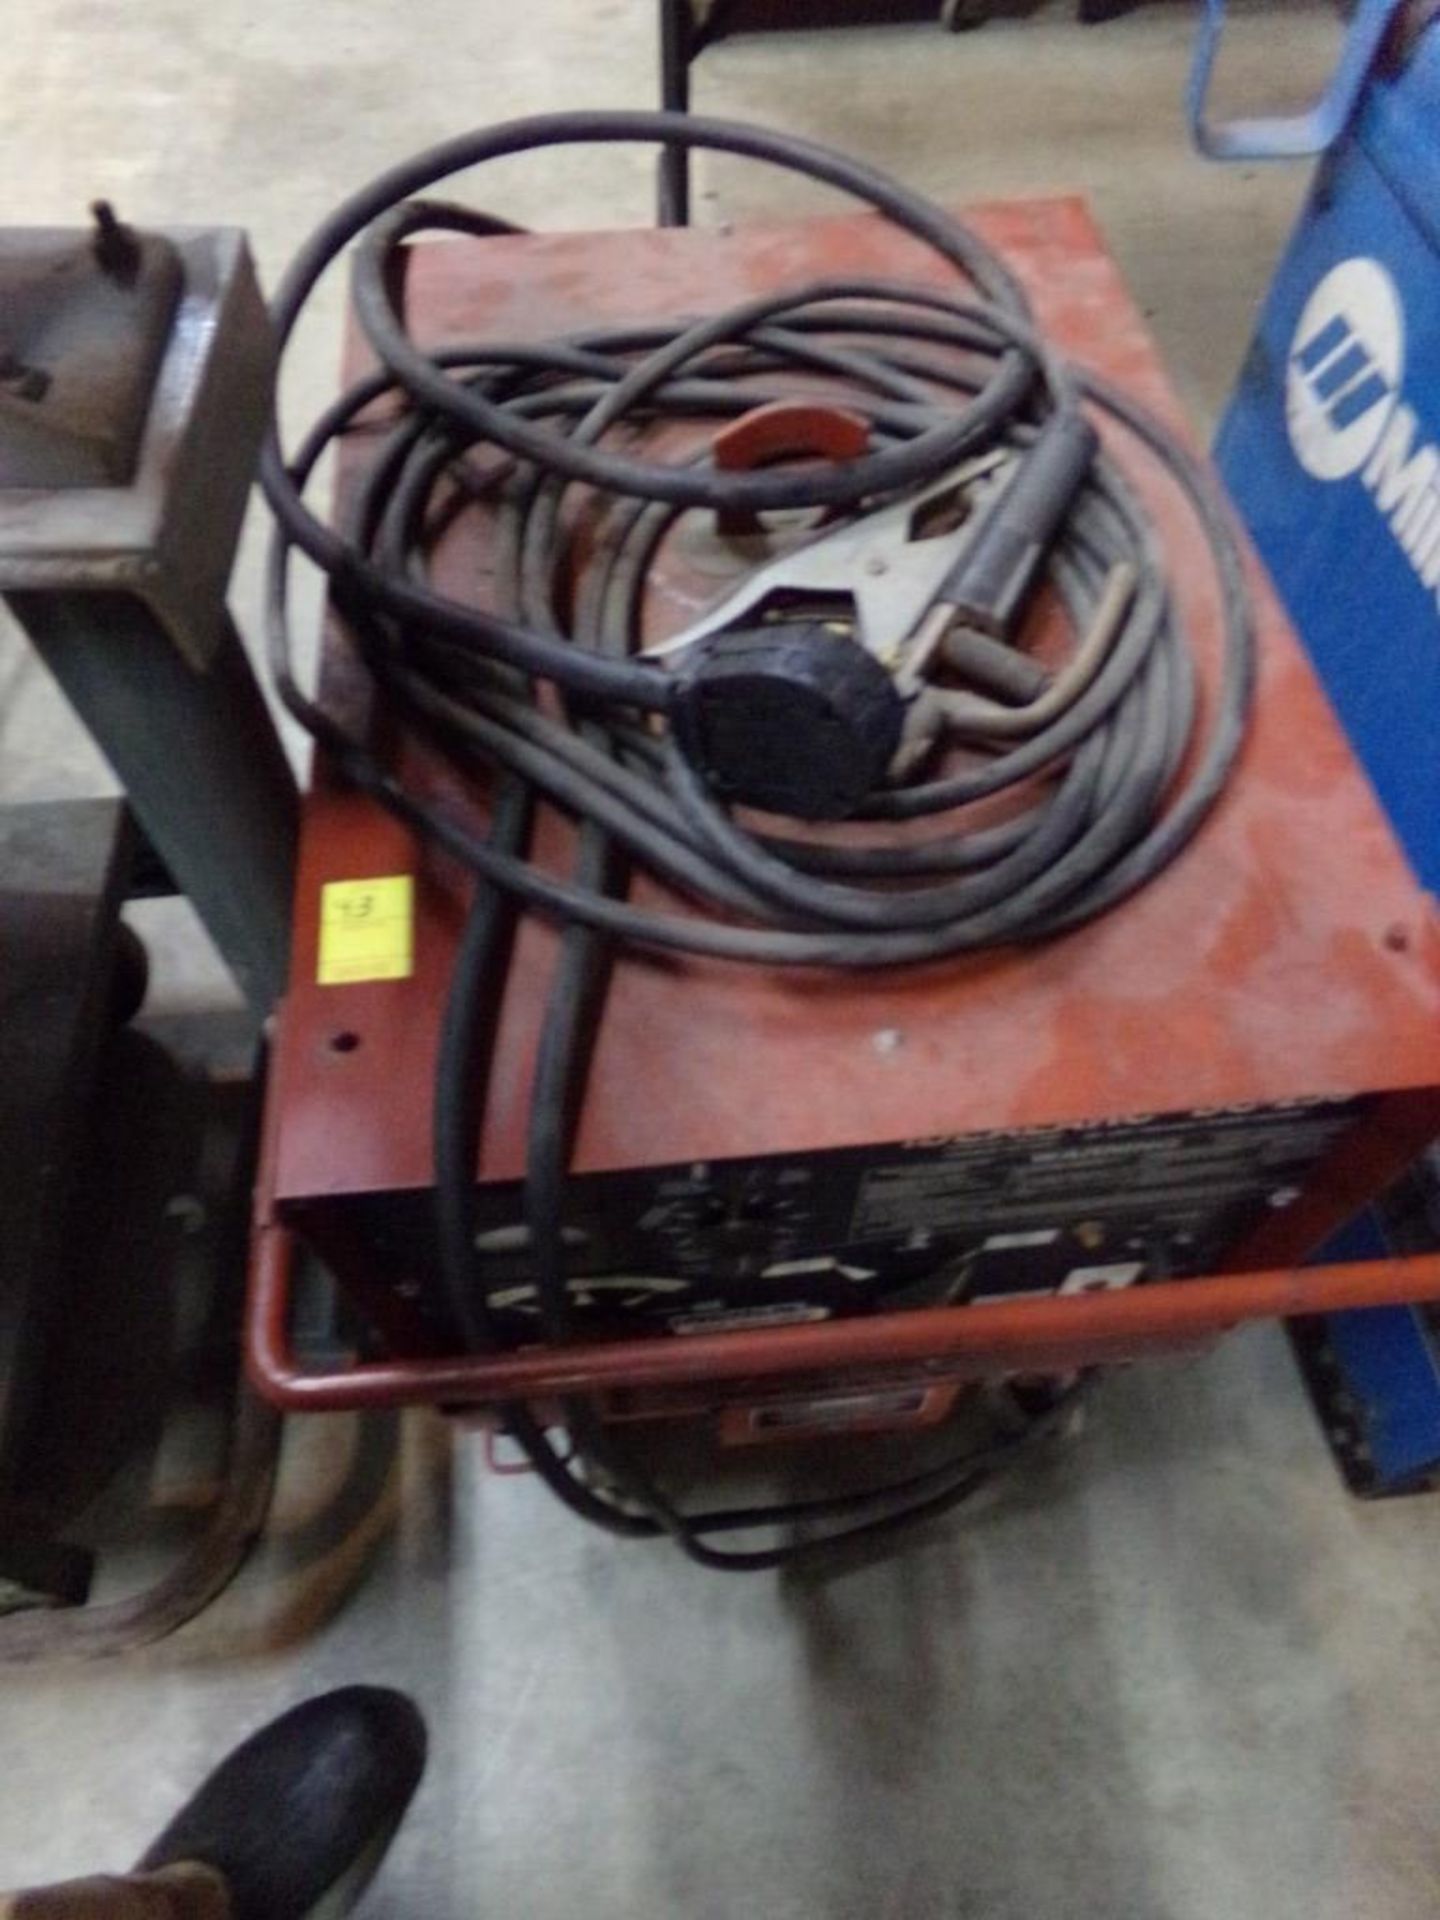 Lincoln Arc Welder, Ideal Arc DC-250, 208/230/460 Volt, Single Phase, S/N 629509, Clean, Very